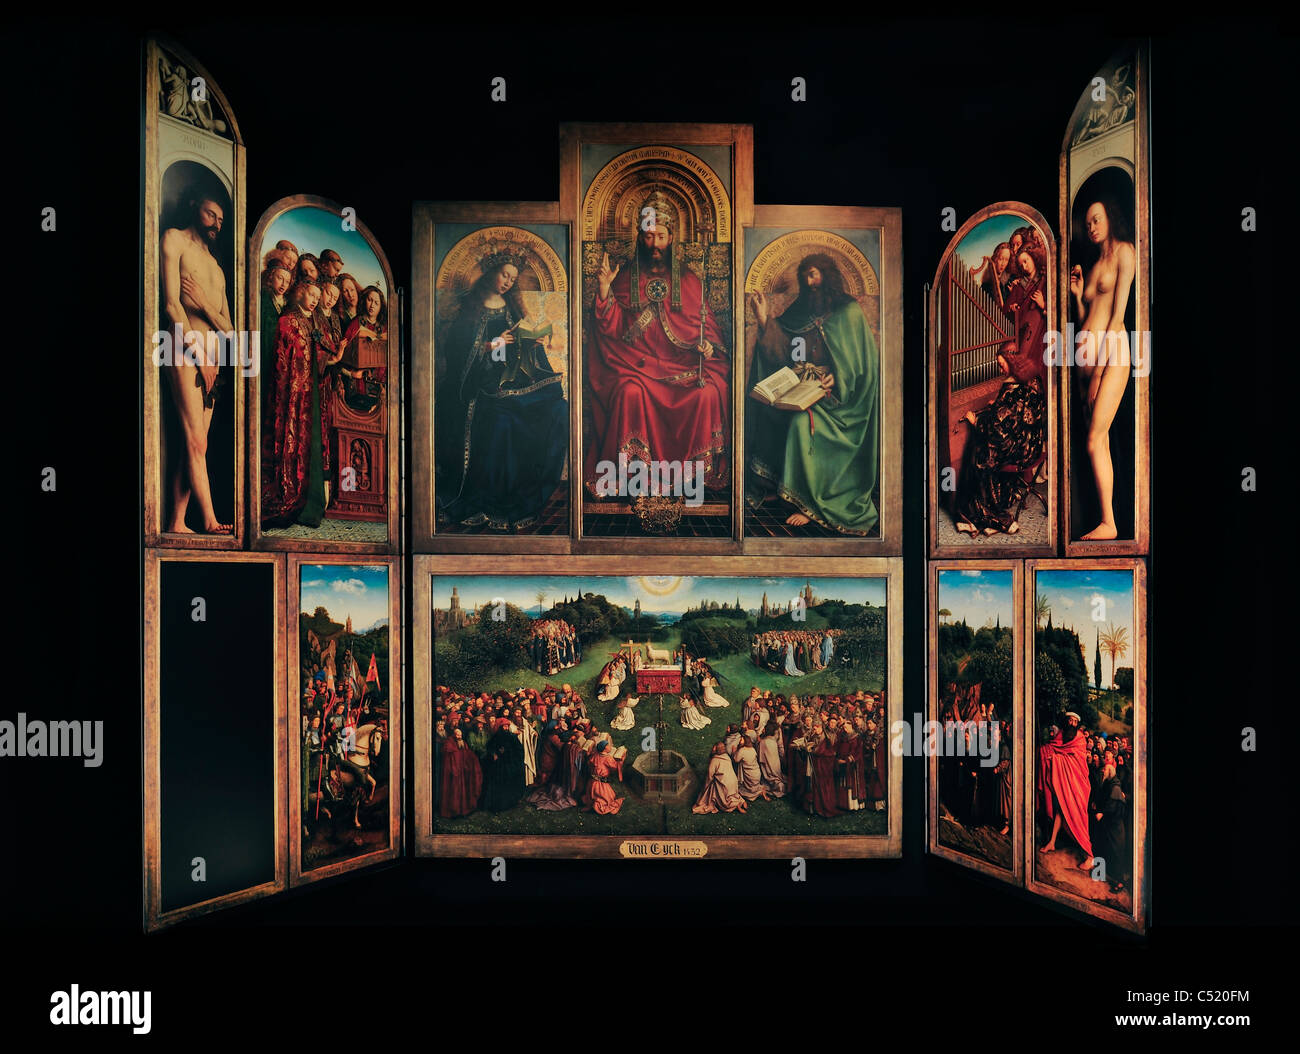 Replica of the Ghent Altarpiece / Adoration of the Mystic Lamb / Het Lam Gods painted by Jan van Eyck at STAM, Ghent city museum Stock Photo